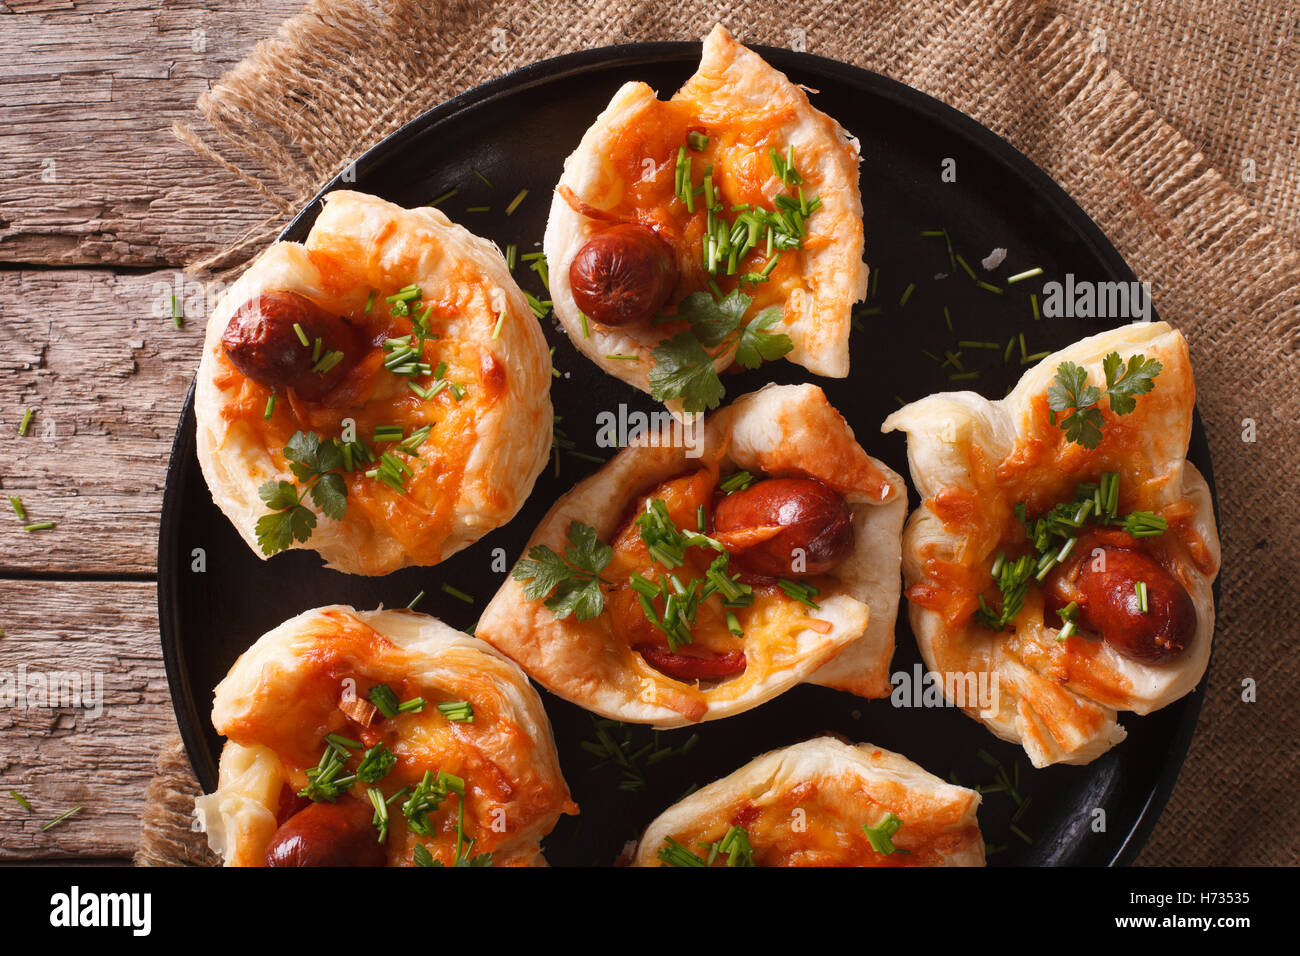 muffins stuffed with sausage and cheese on a plate close-up. horizontal view from above Stock Photo